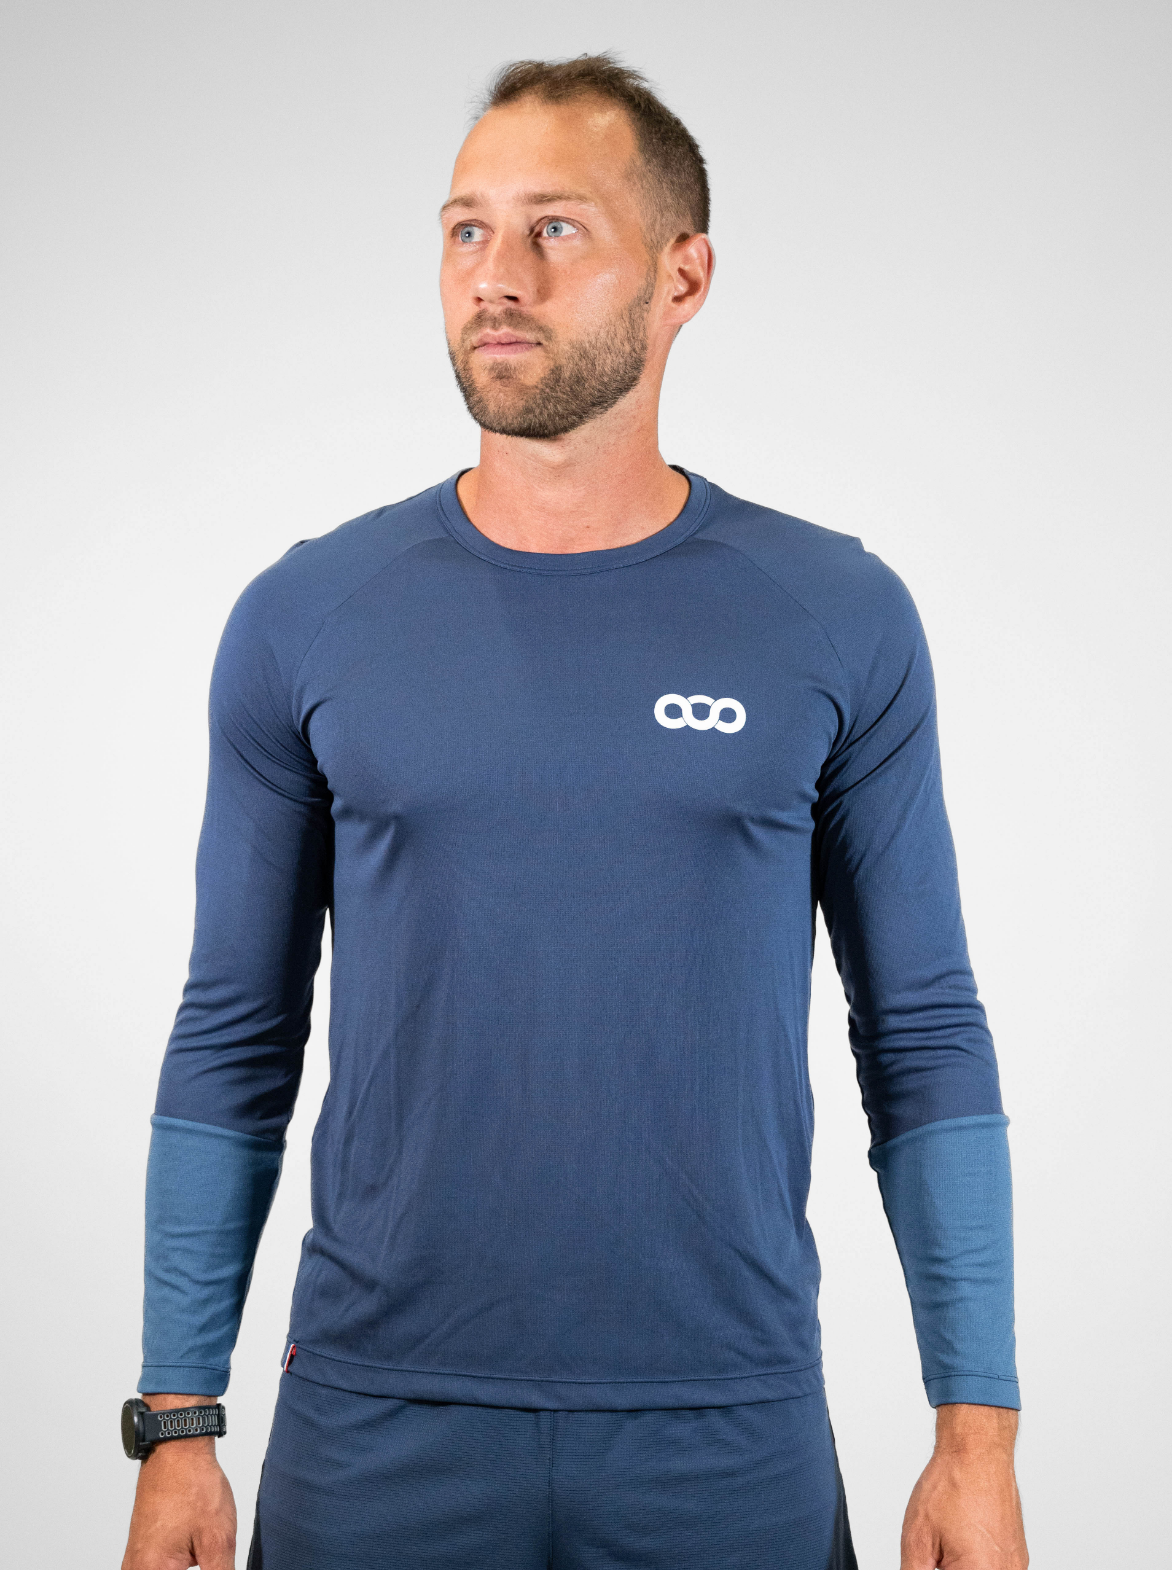 T-Shirt manches longues Running Homme Made in France et Recyclé - TOULON - Ventes privées